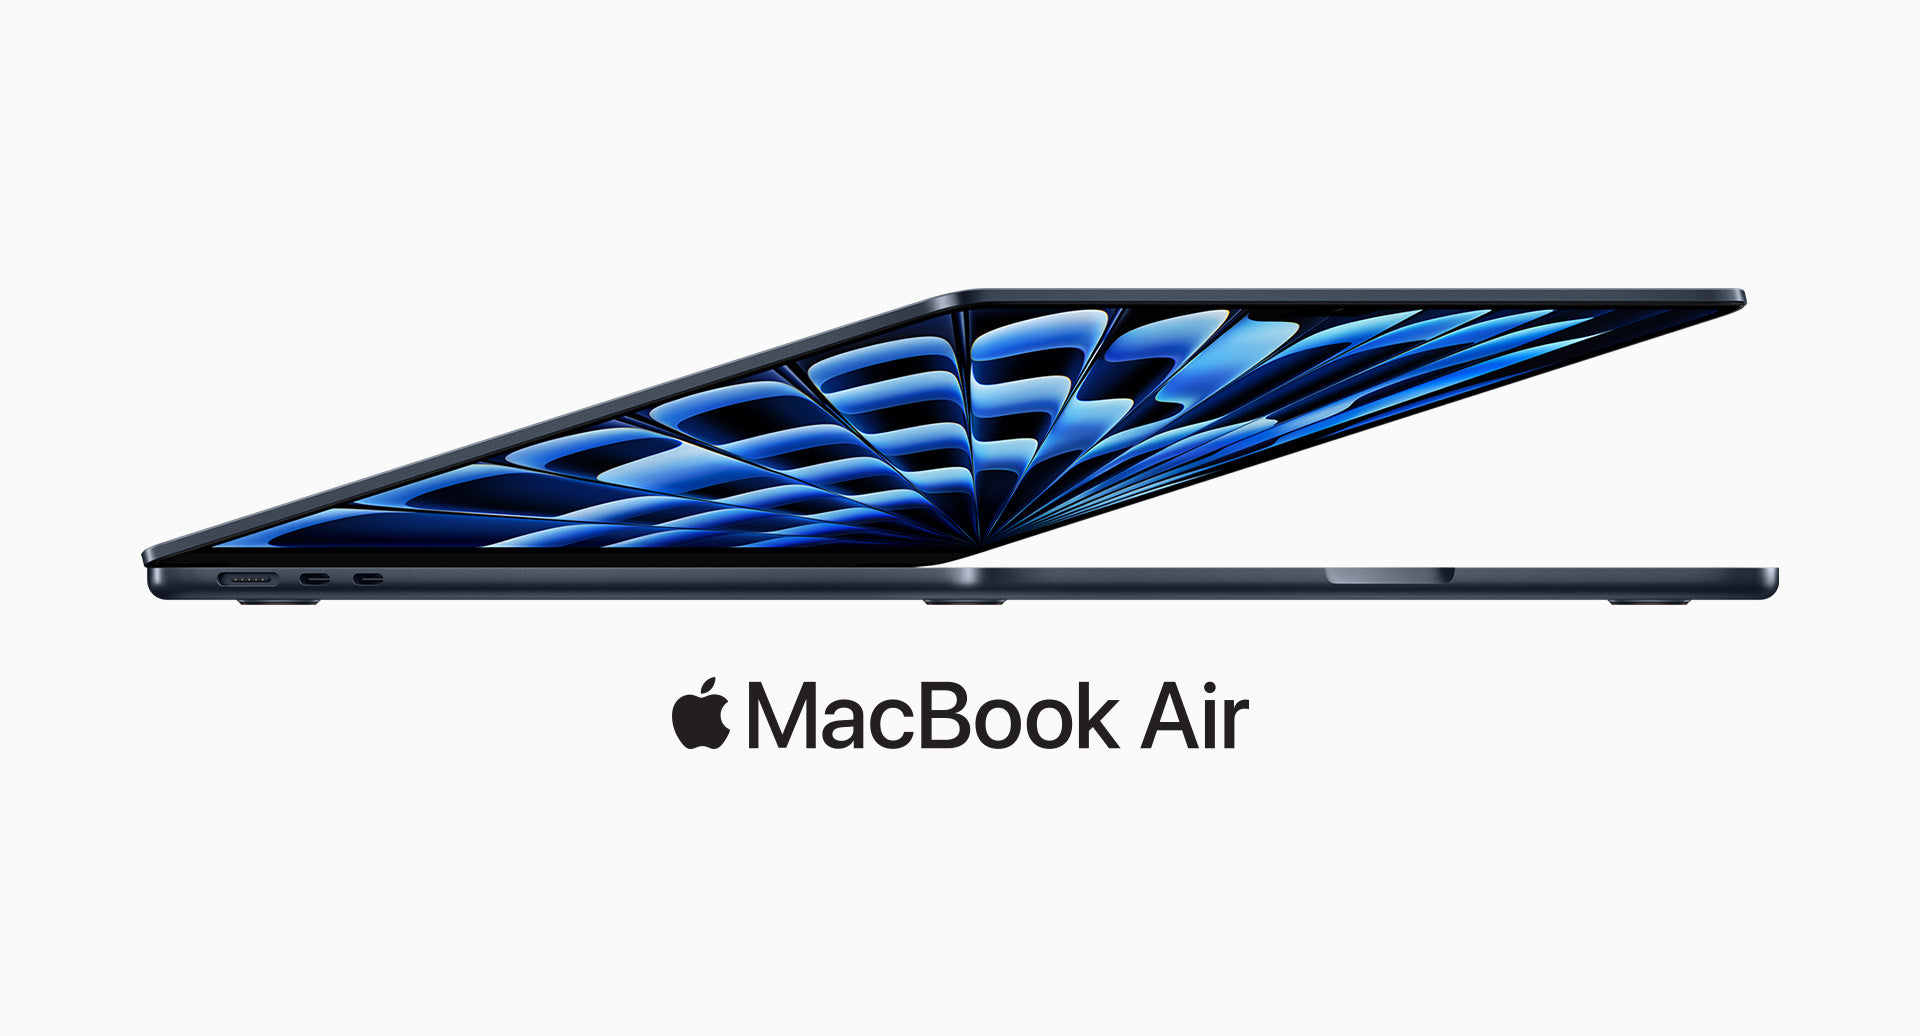 Be the First to Get the New MacBook Air M3: Preorder Now for Exclusive